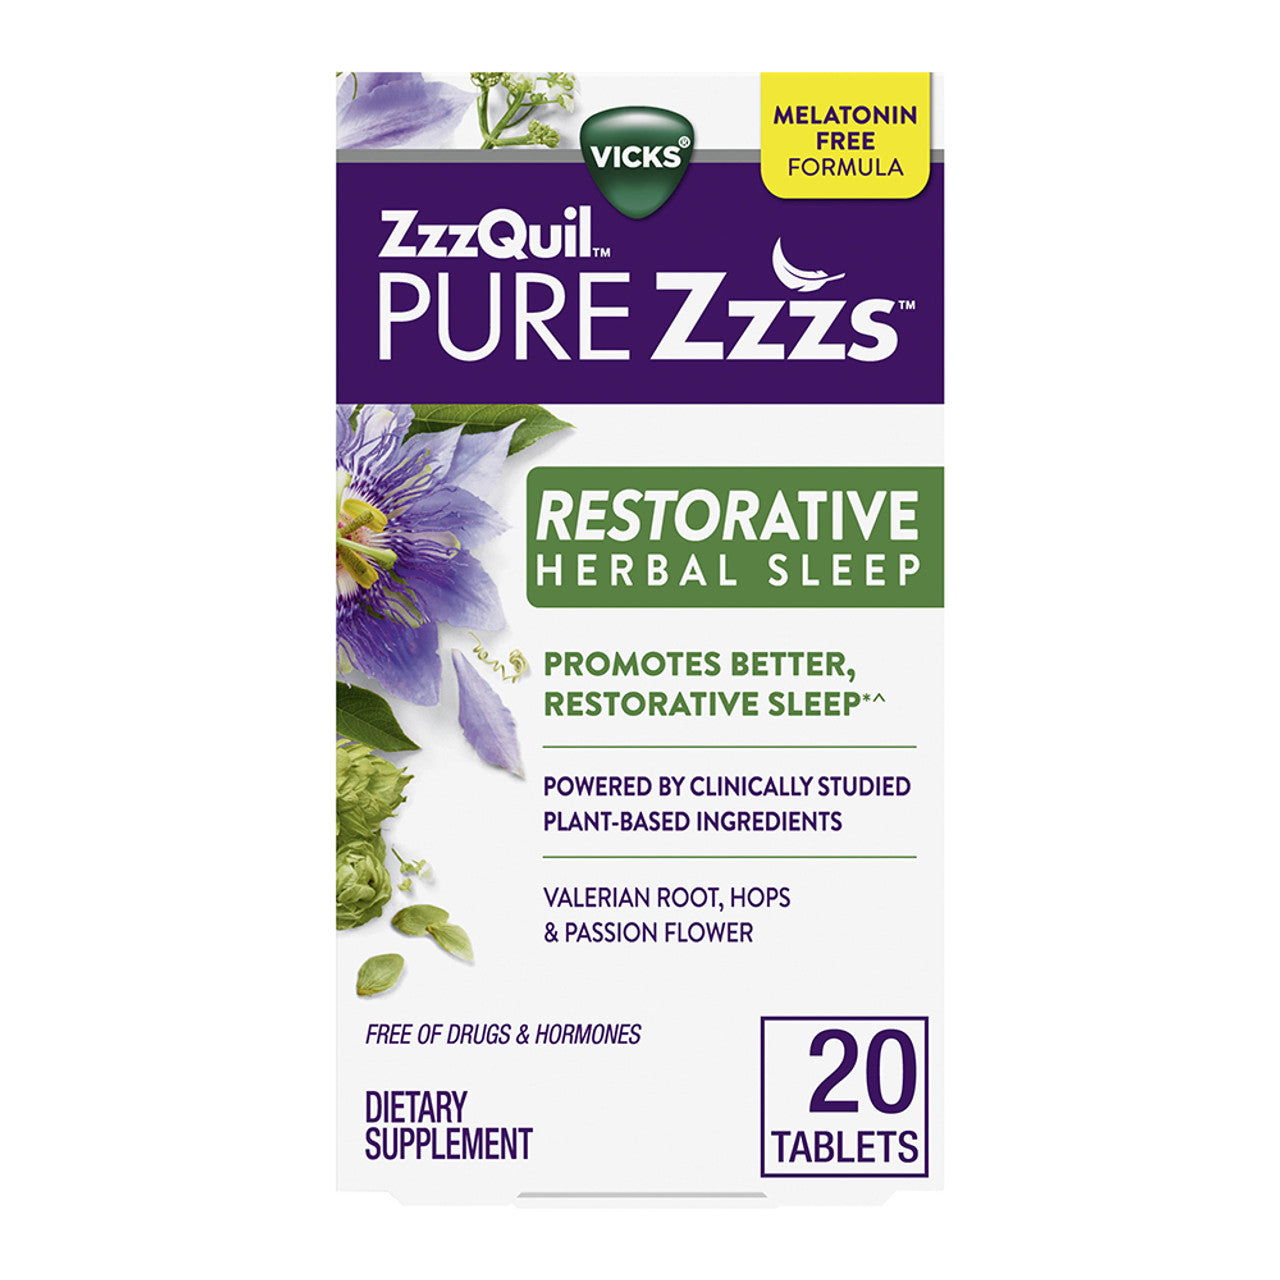 Vicks ZzzQuil Pure Zzzs Restorative Herbal Sleep Aid Tablets, 20 Ea